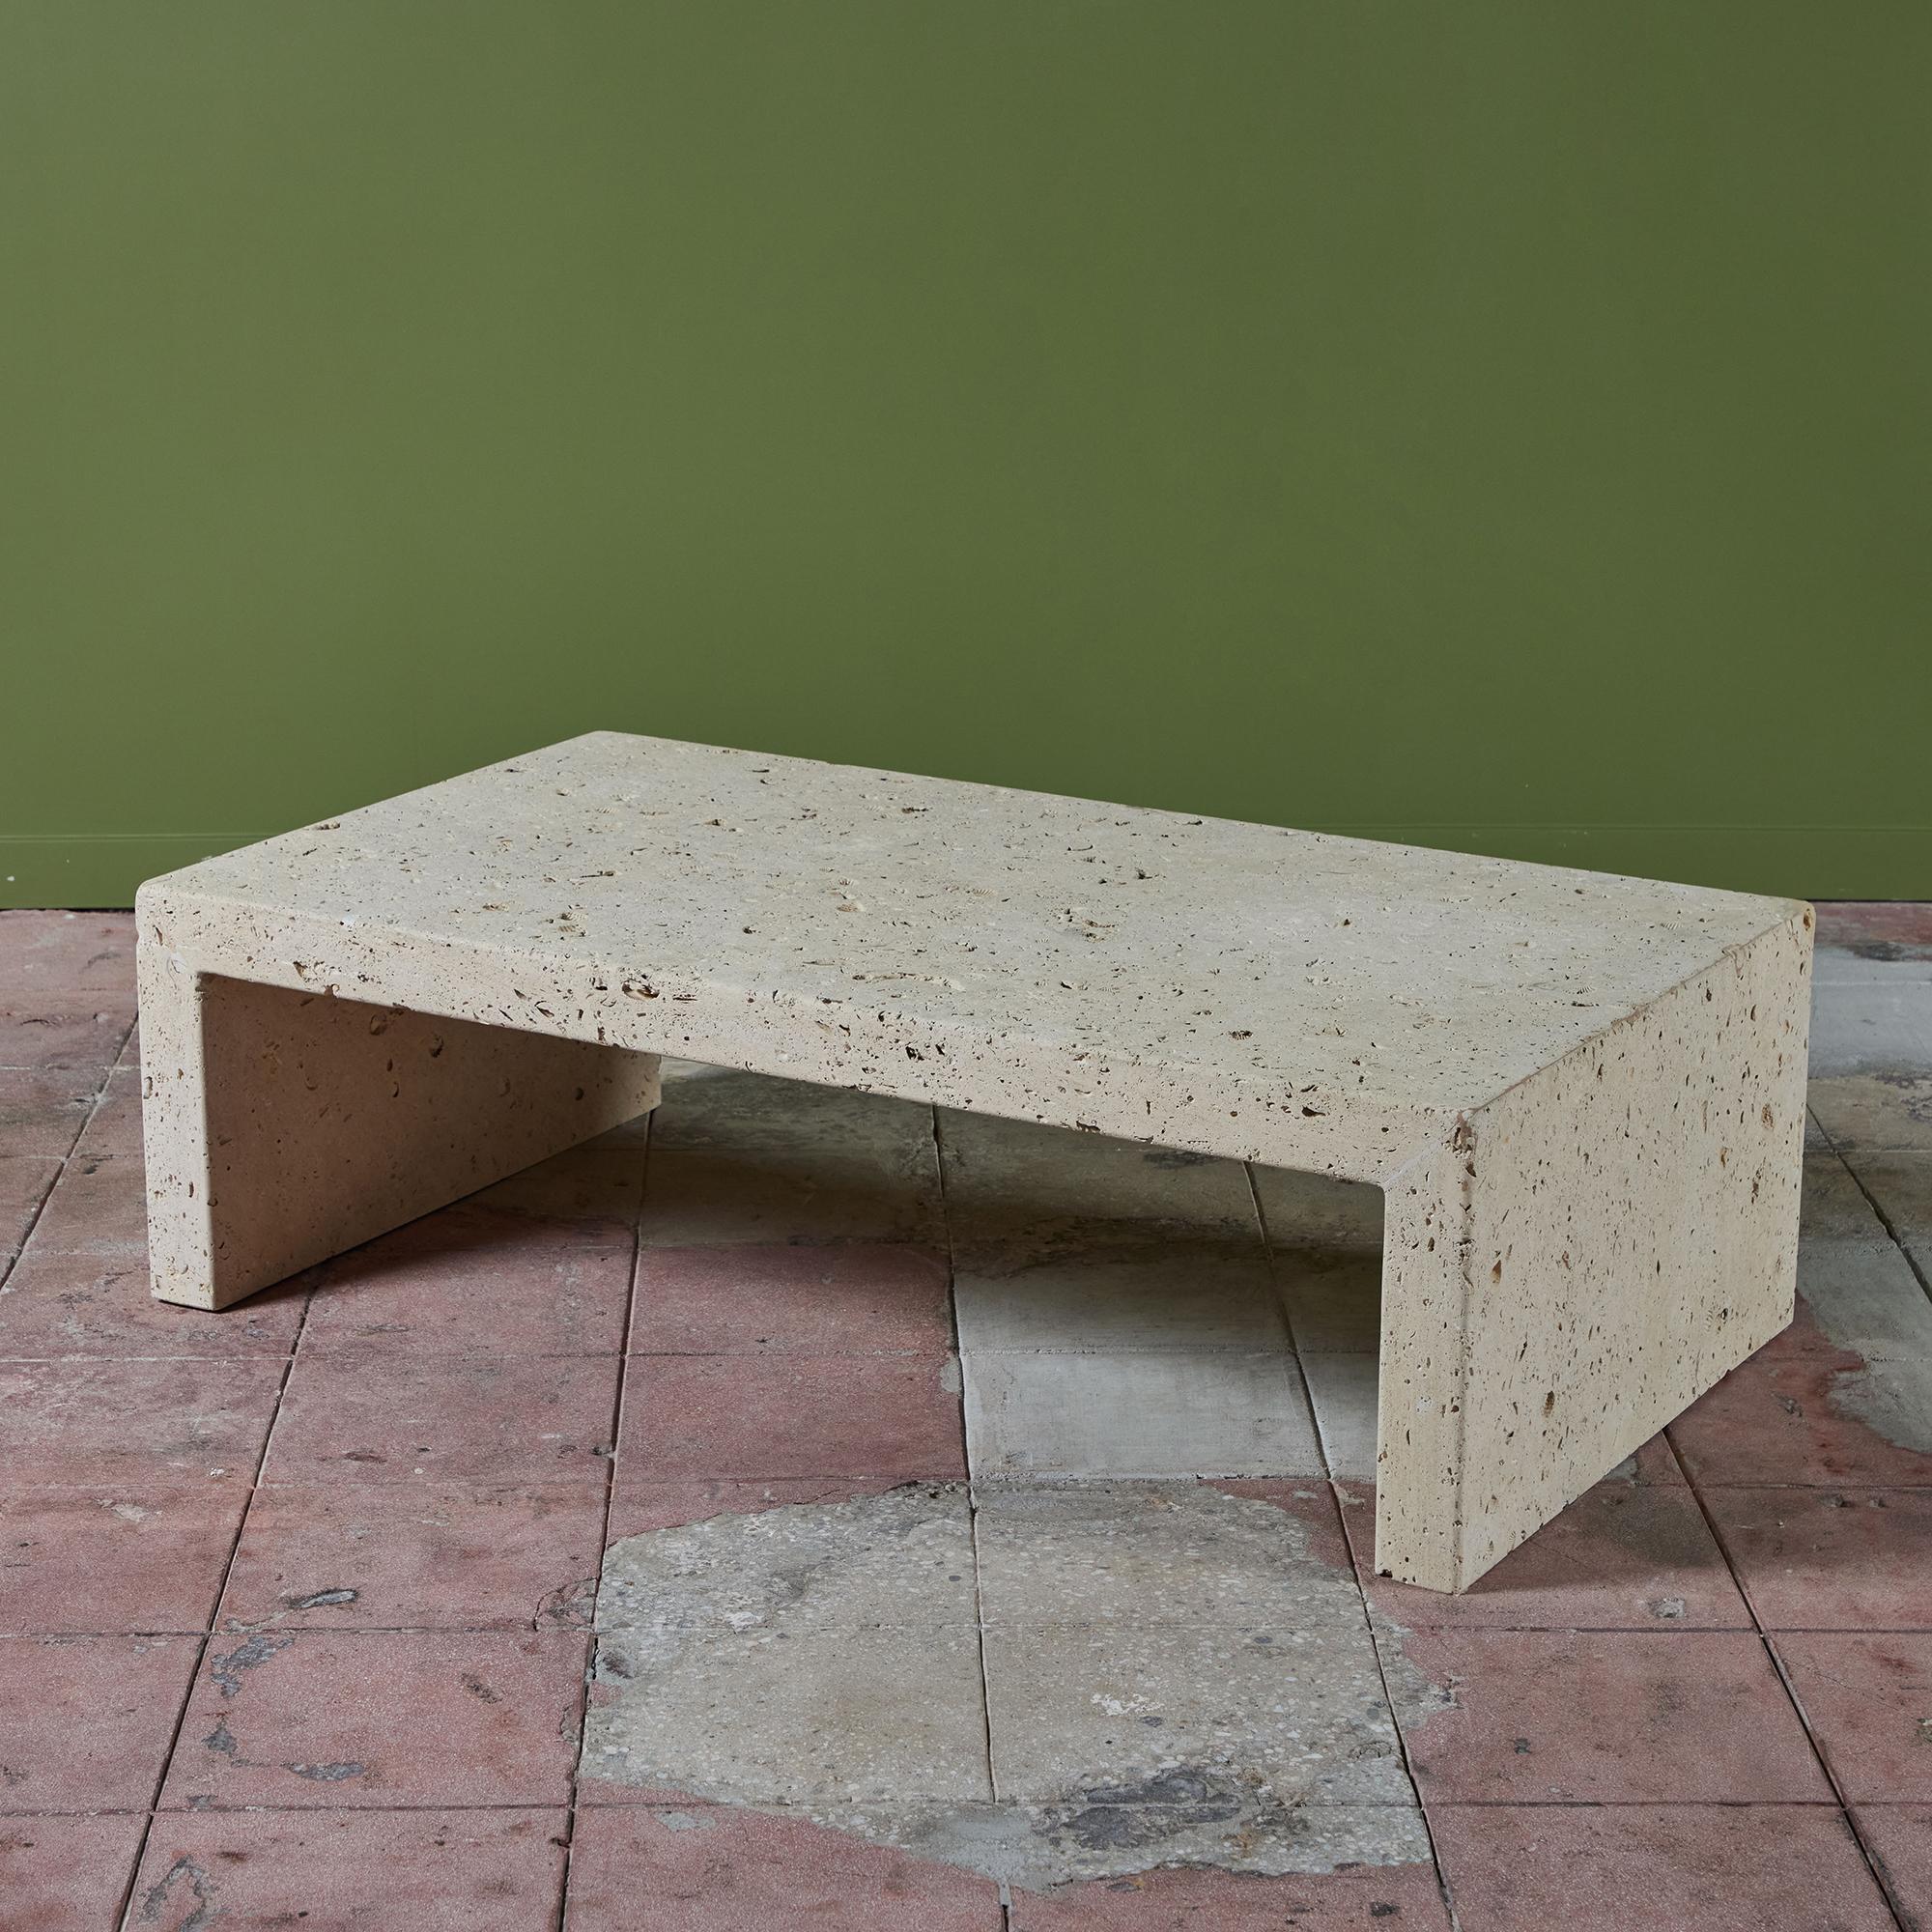 Limestone rectangular coffee table also known as Texas Shellstone, has a thick table top with two waterfall edges, c.1970s, USA. This unique stone has many fossils and shells embedded through out the stone. With a sleek shape is reminiscent of